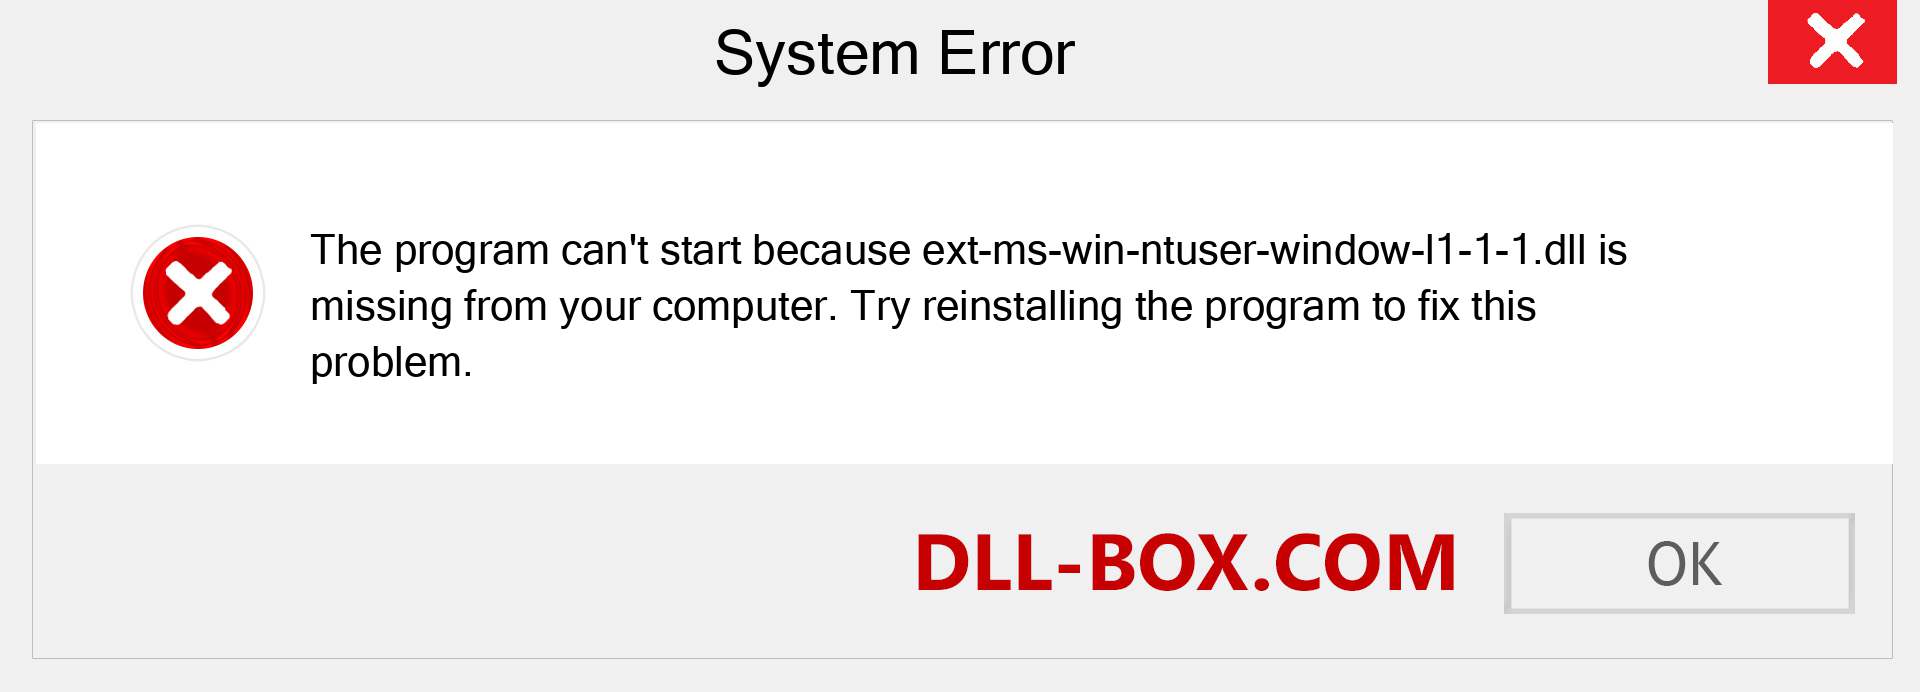  ext-ms-win-ntuser-window-l1-1-1.dll file is missing?. Download for Windows 7, 8, 10 - Fix  ext-ms-win-ntuser-window-l1-1-1 dll Missing Error on Windows, photos, images